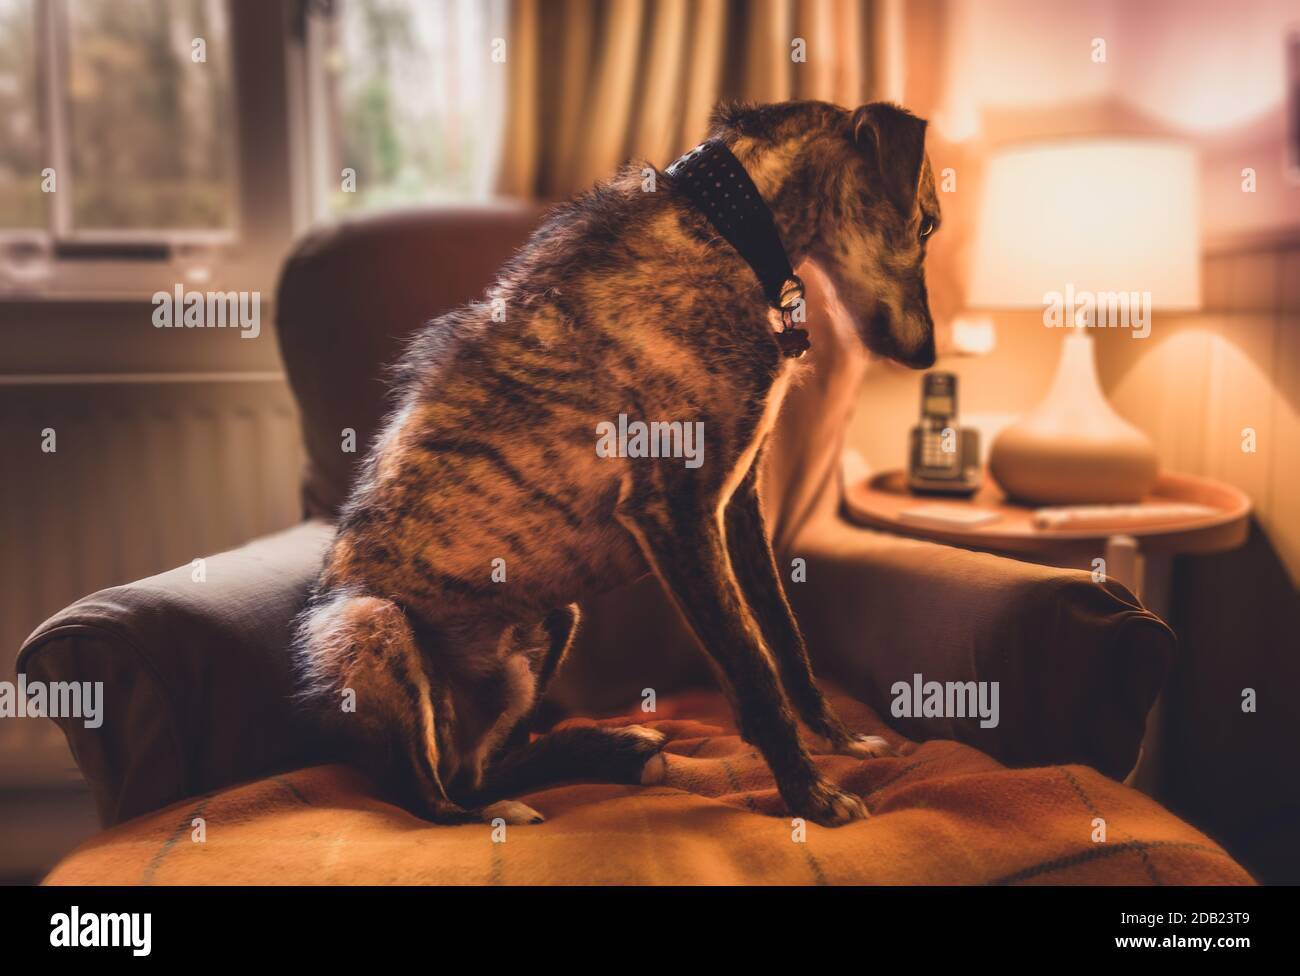 A comfy chair with blanket and side table with lamp. A lurcher relaxing with head on the arm of seat Stock Photo